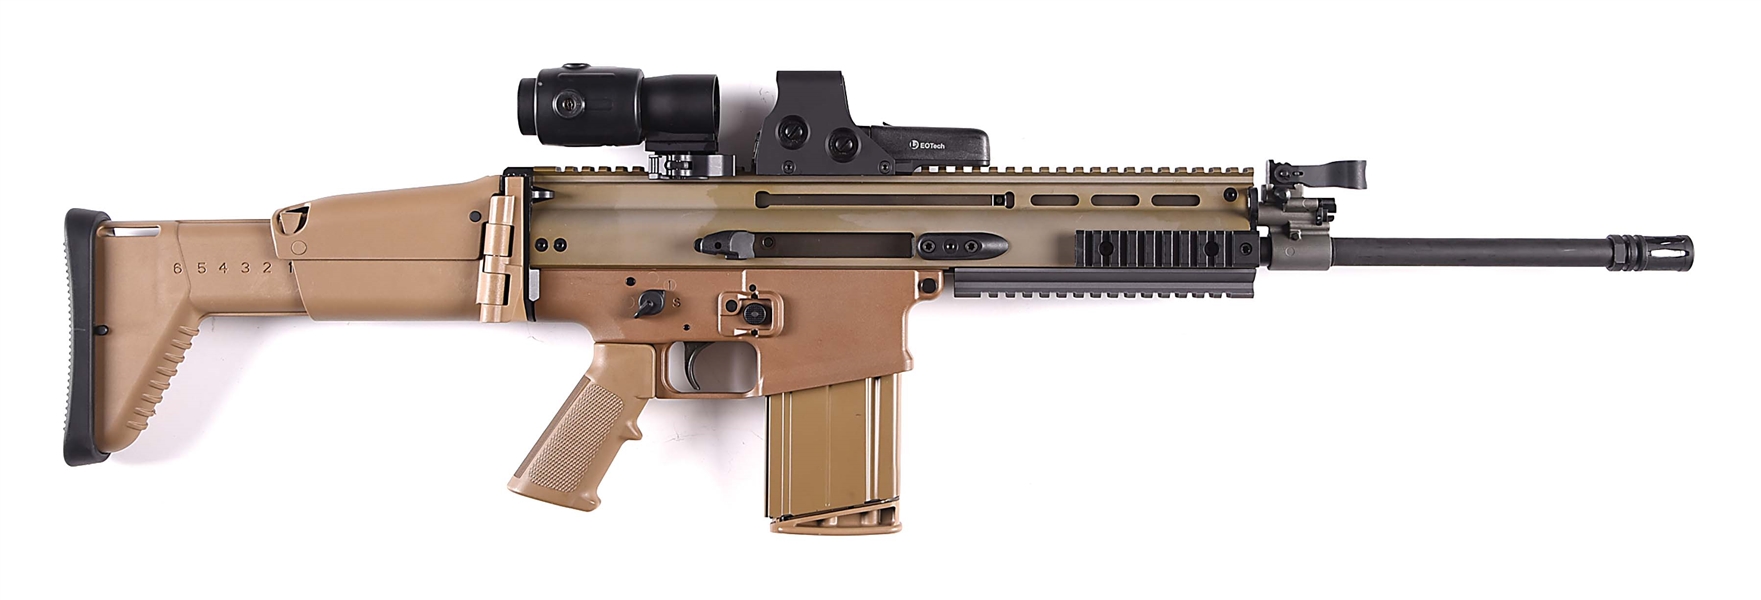 (M) FN HERSTAL SCAR 17S SEMI-AUTOMATIC RIFLE WITH EOTECH OPTICS.